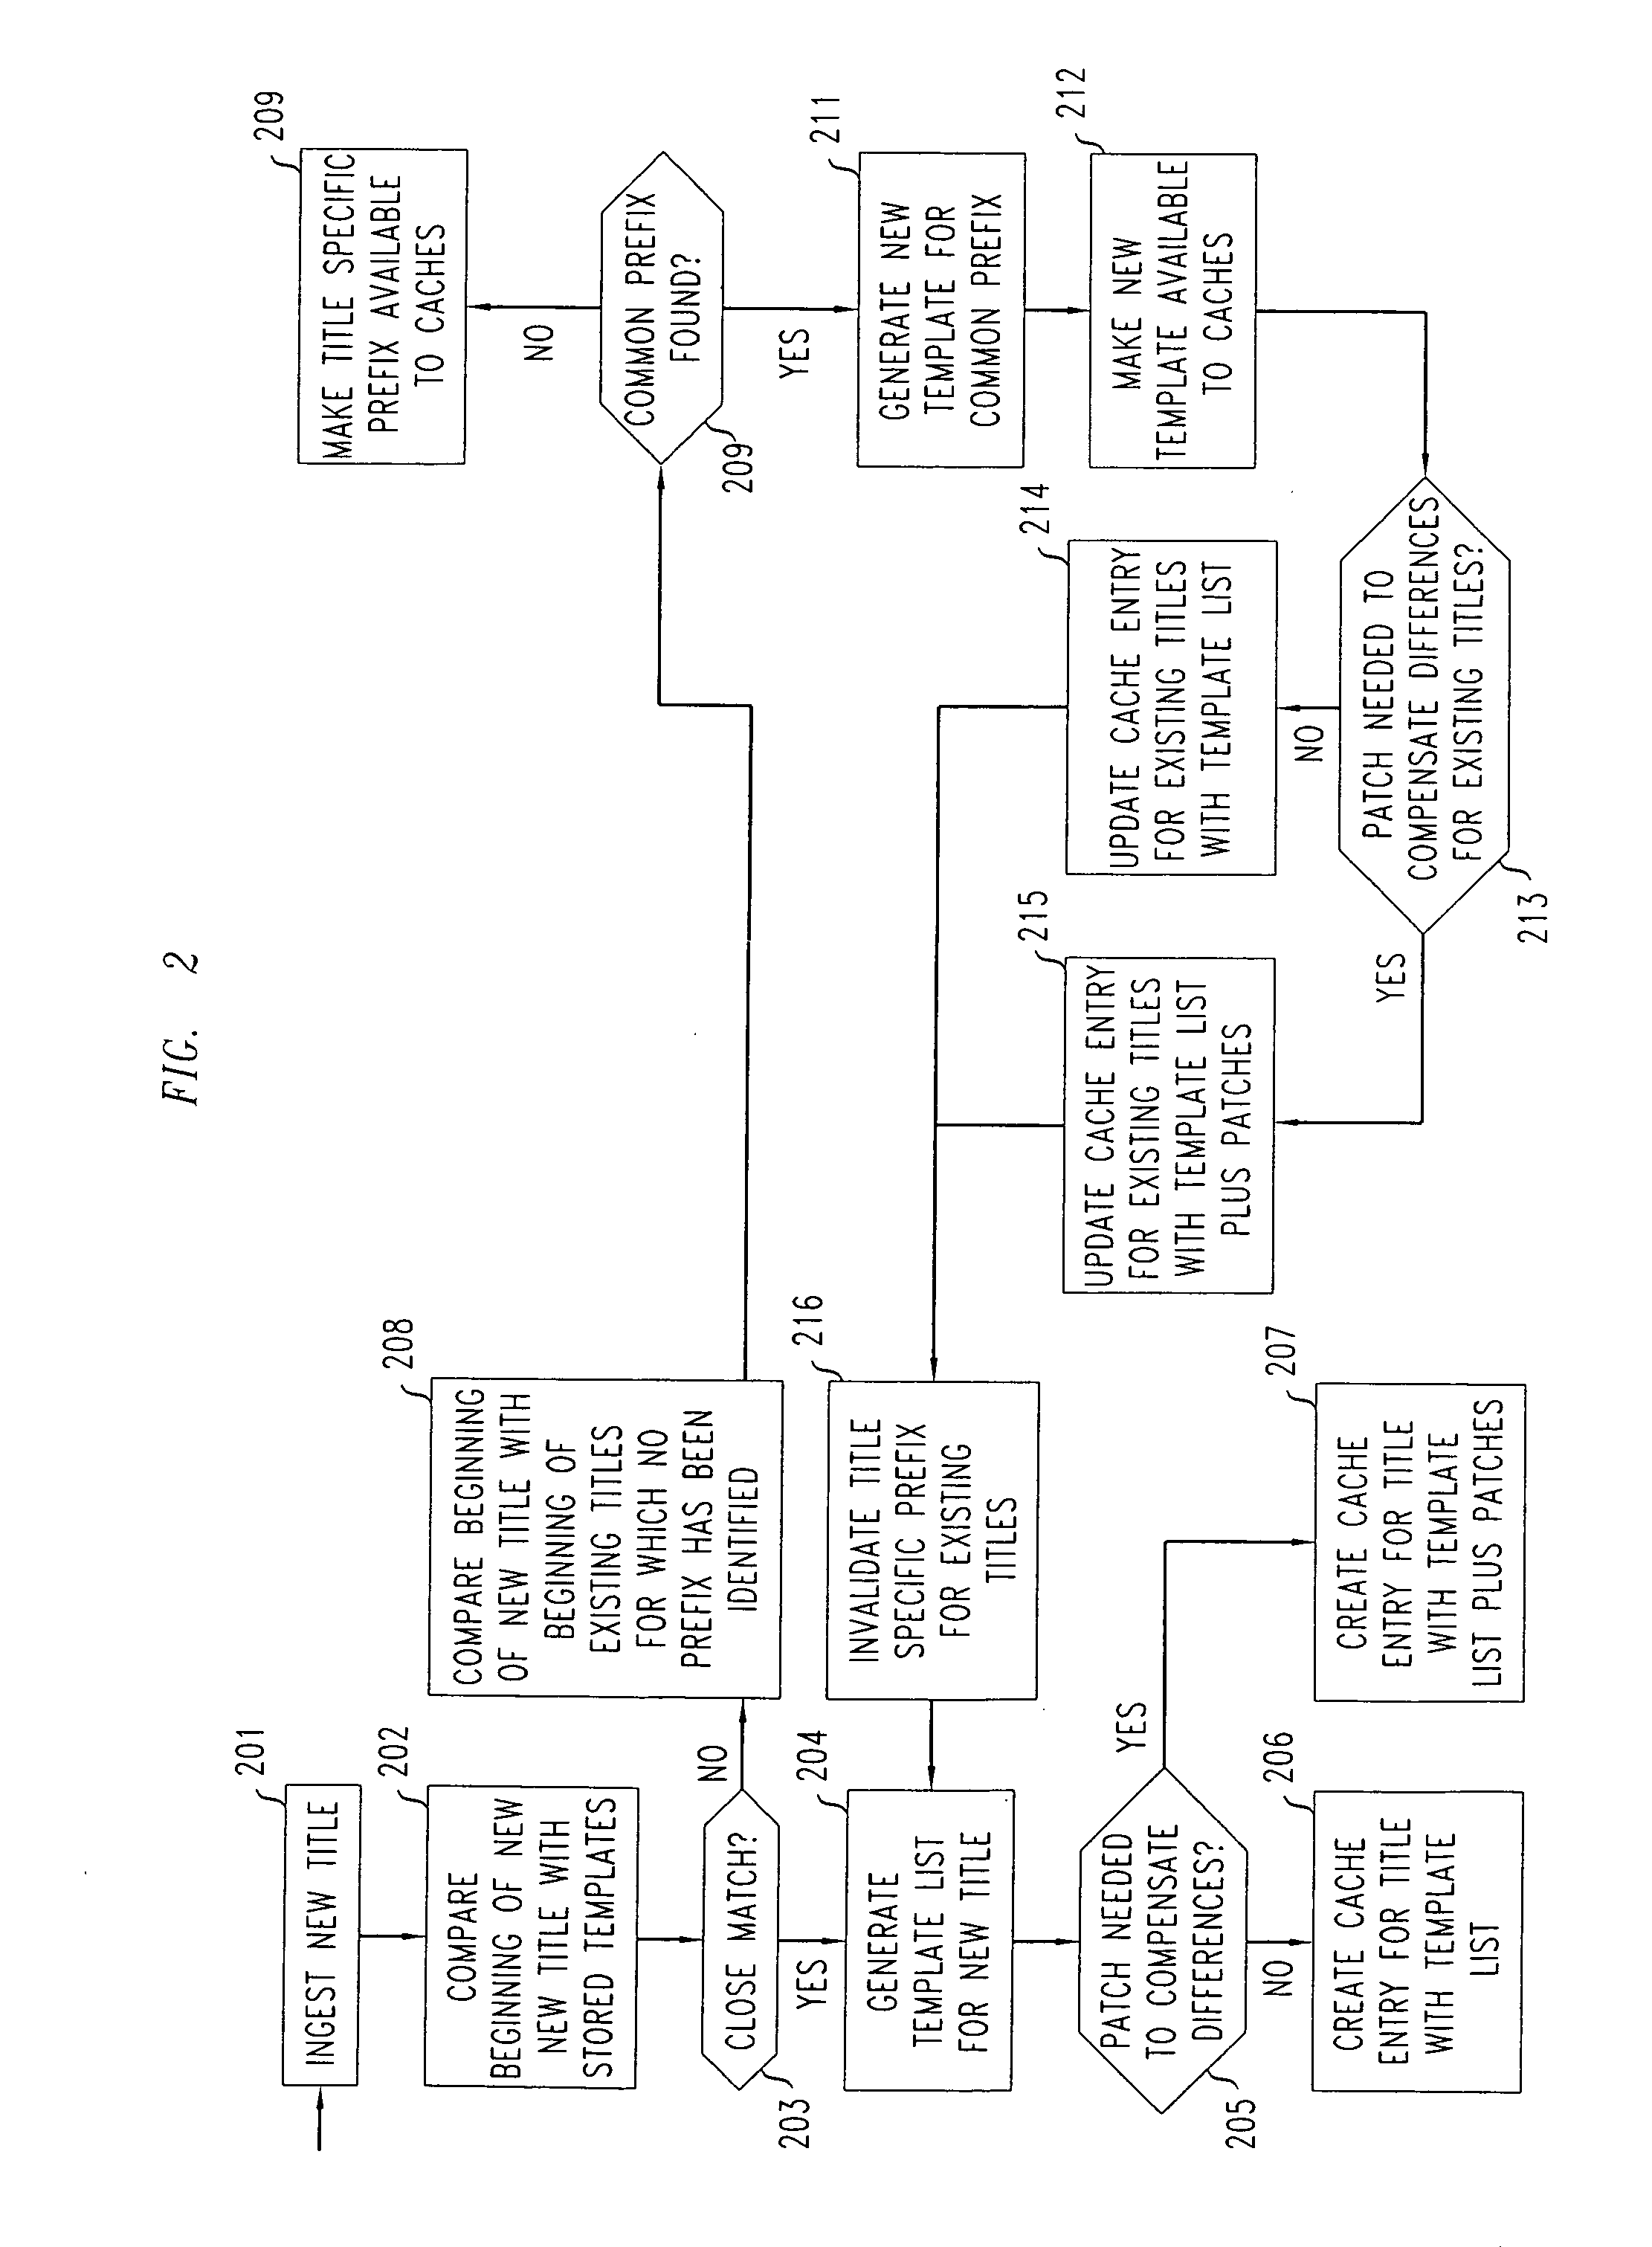 Method and apparatus for performing template-based prefix caching for use in video-on-demand applications